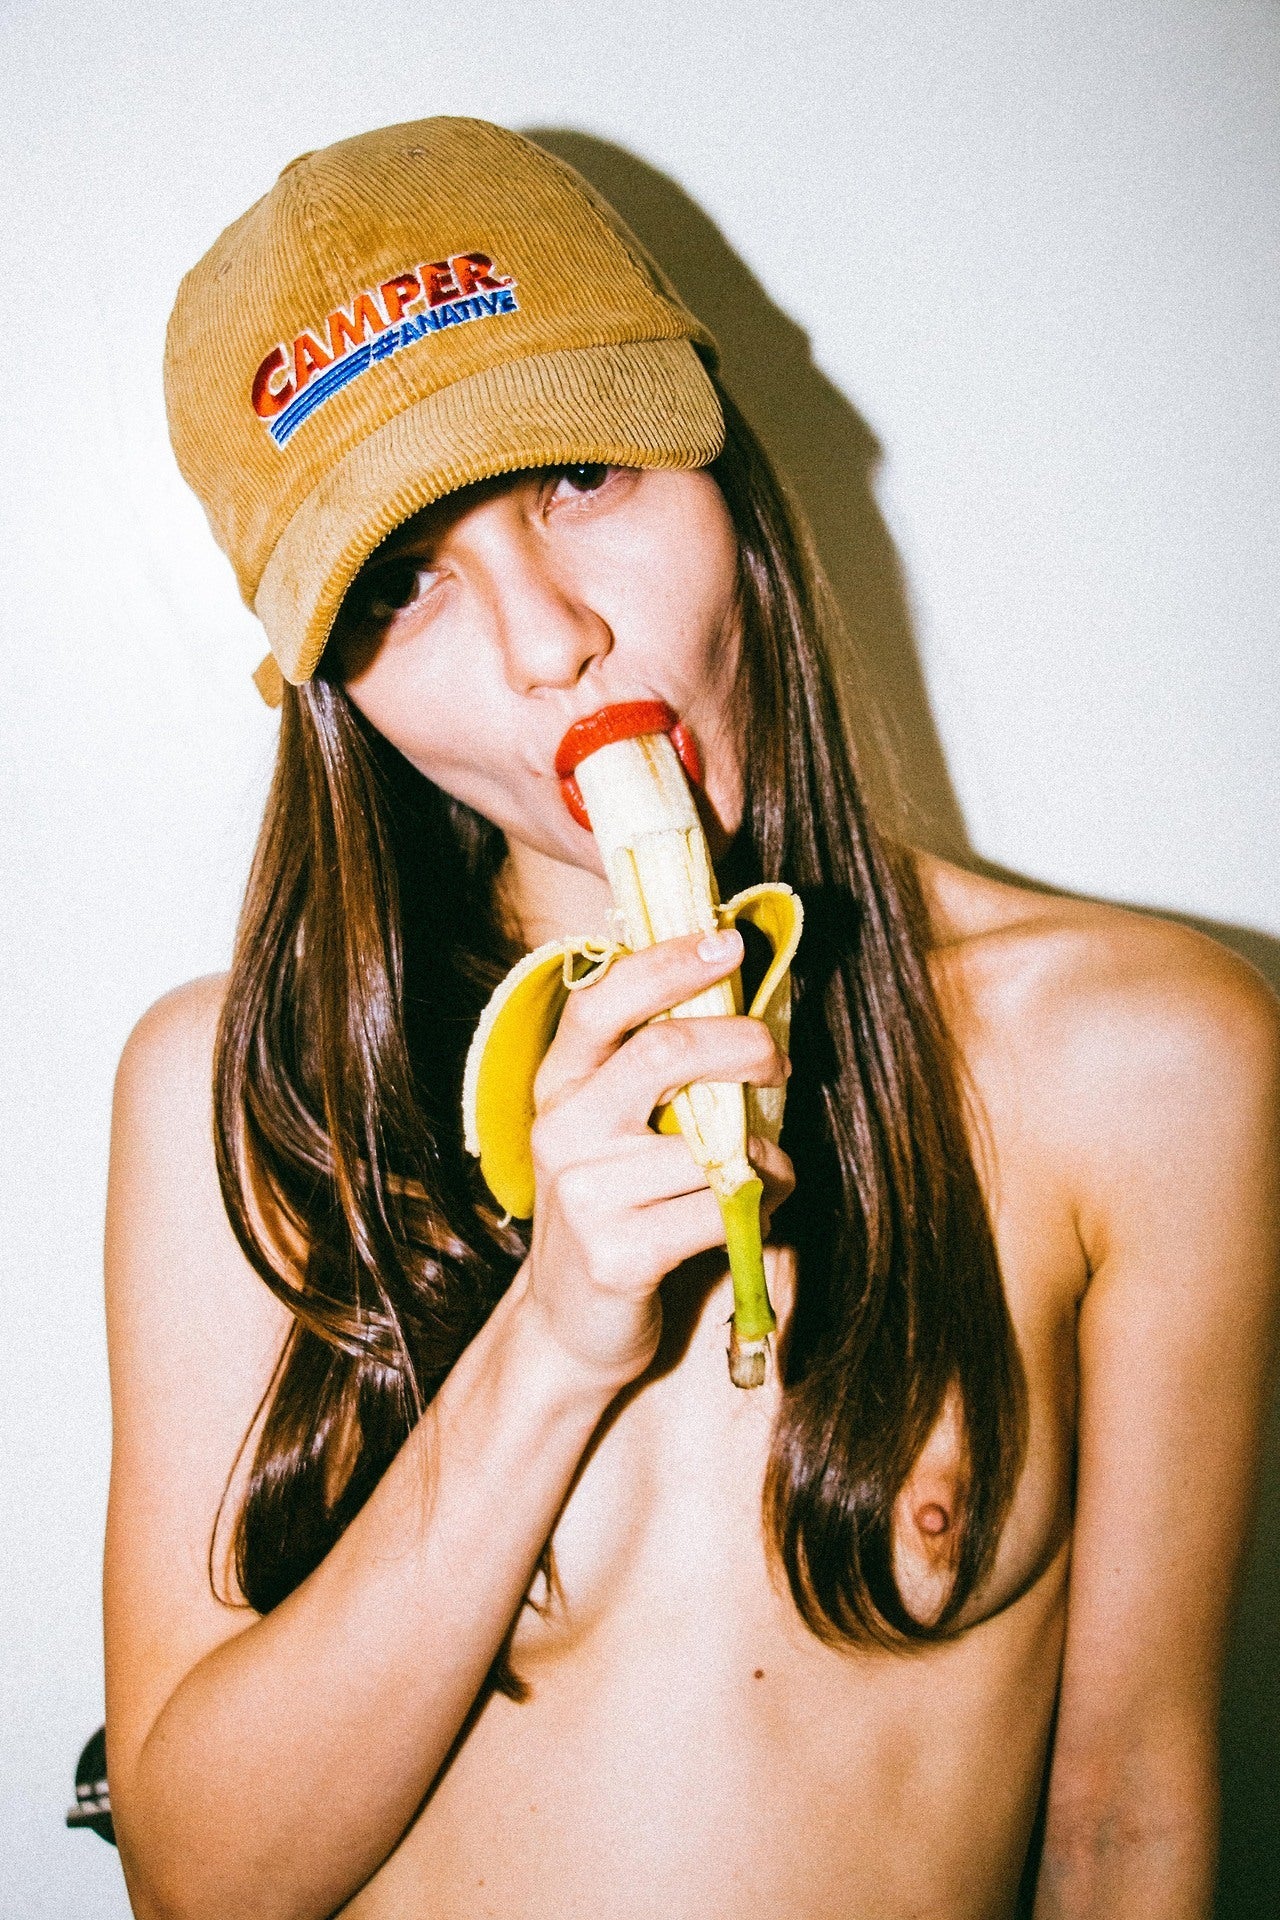 Eat The Rainbow - Photo 6 - Another Filthy Magazine